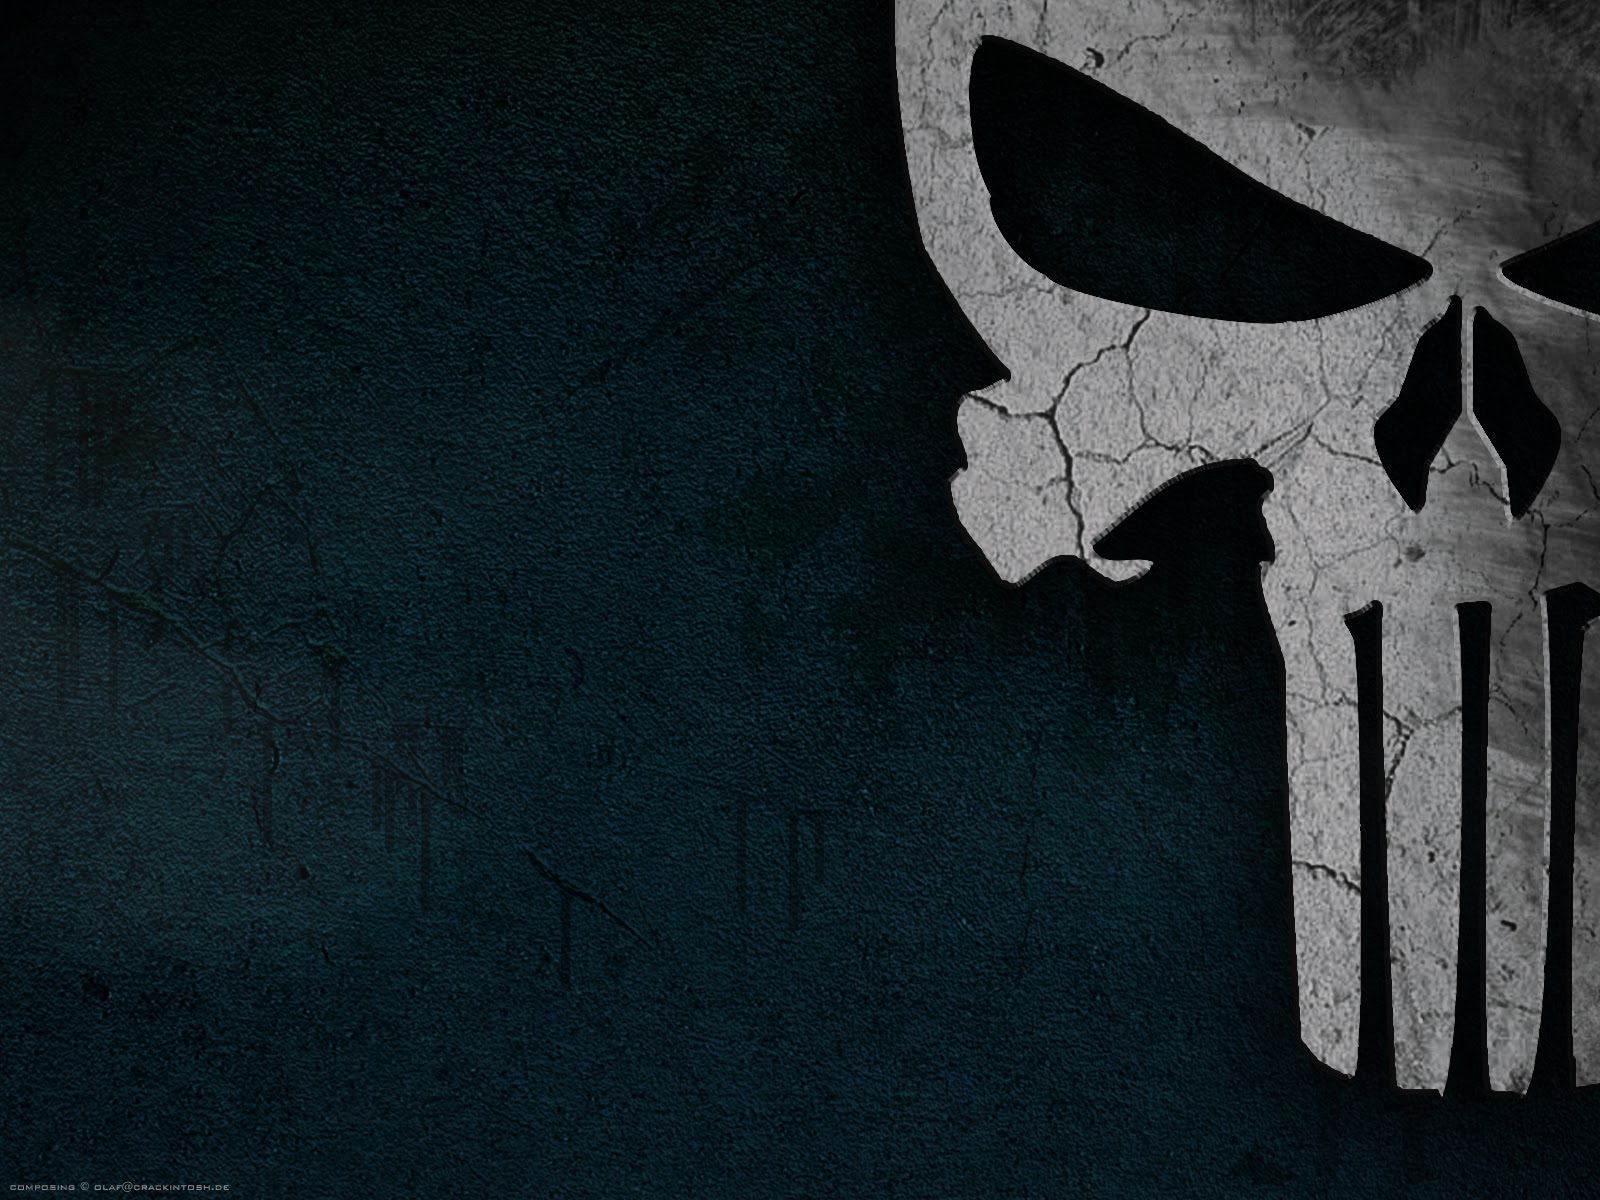 Punisher iskull wallpaperi Clickandseeworld is all about 